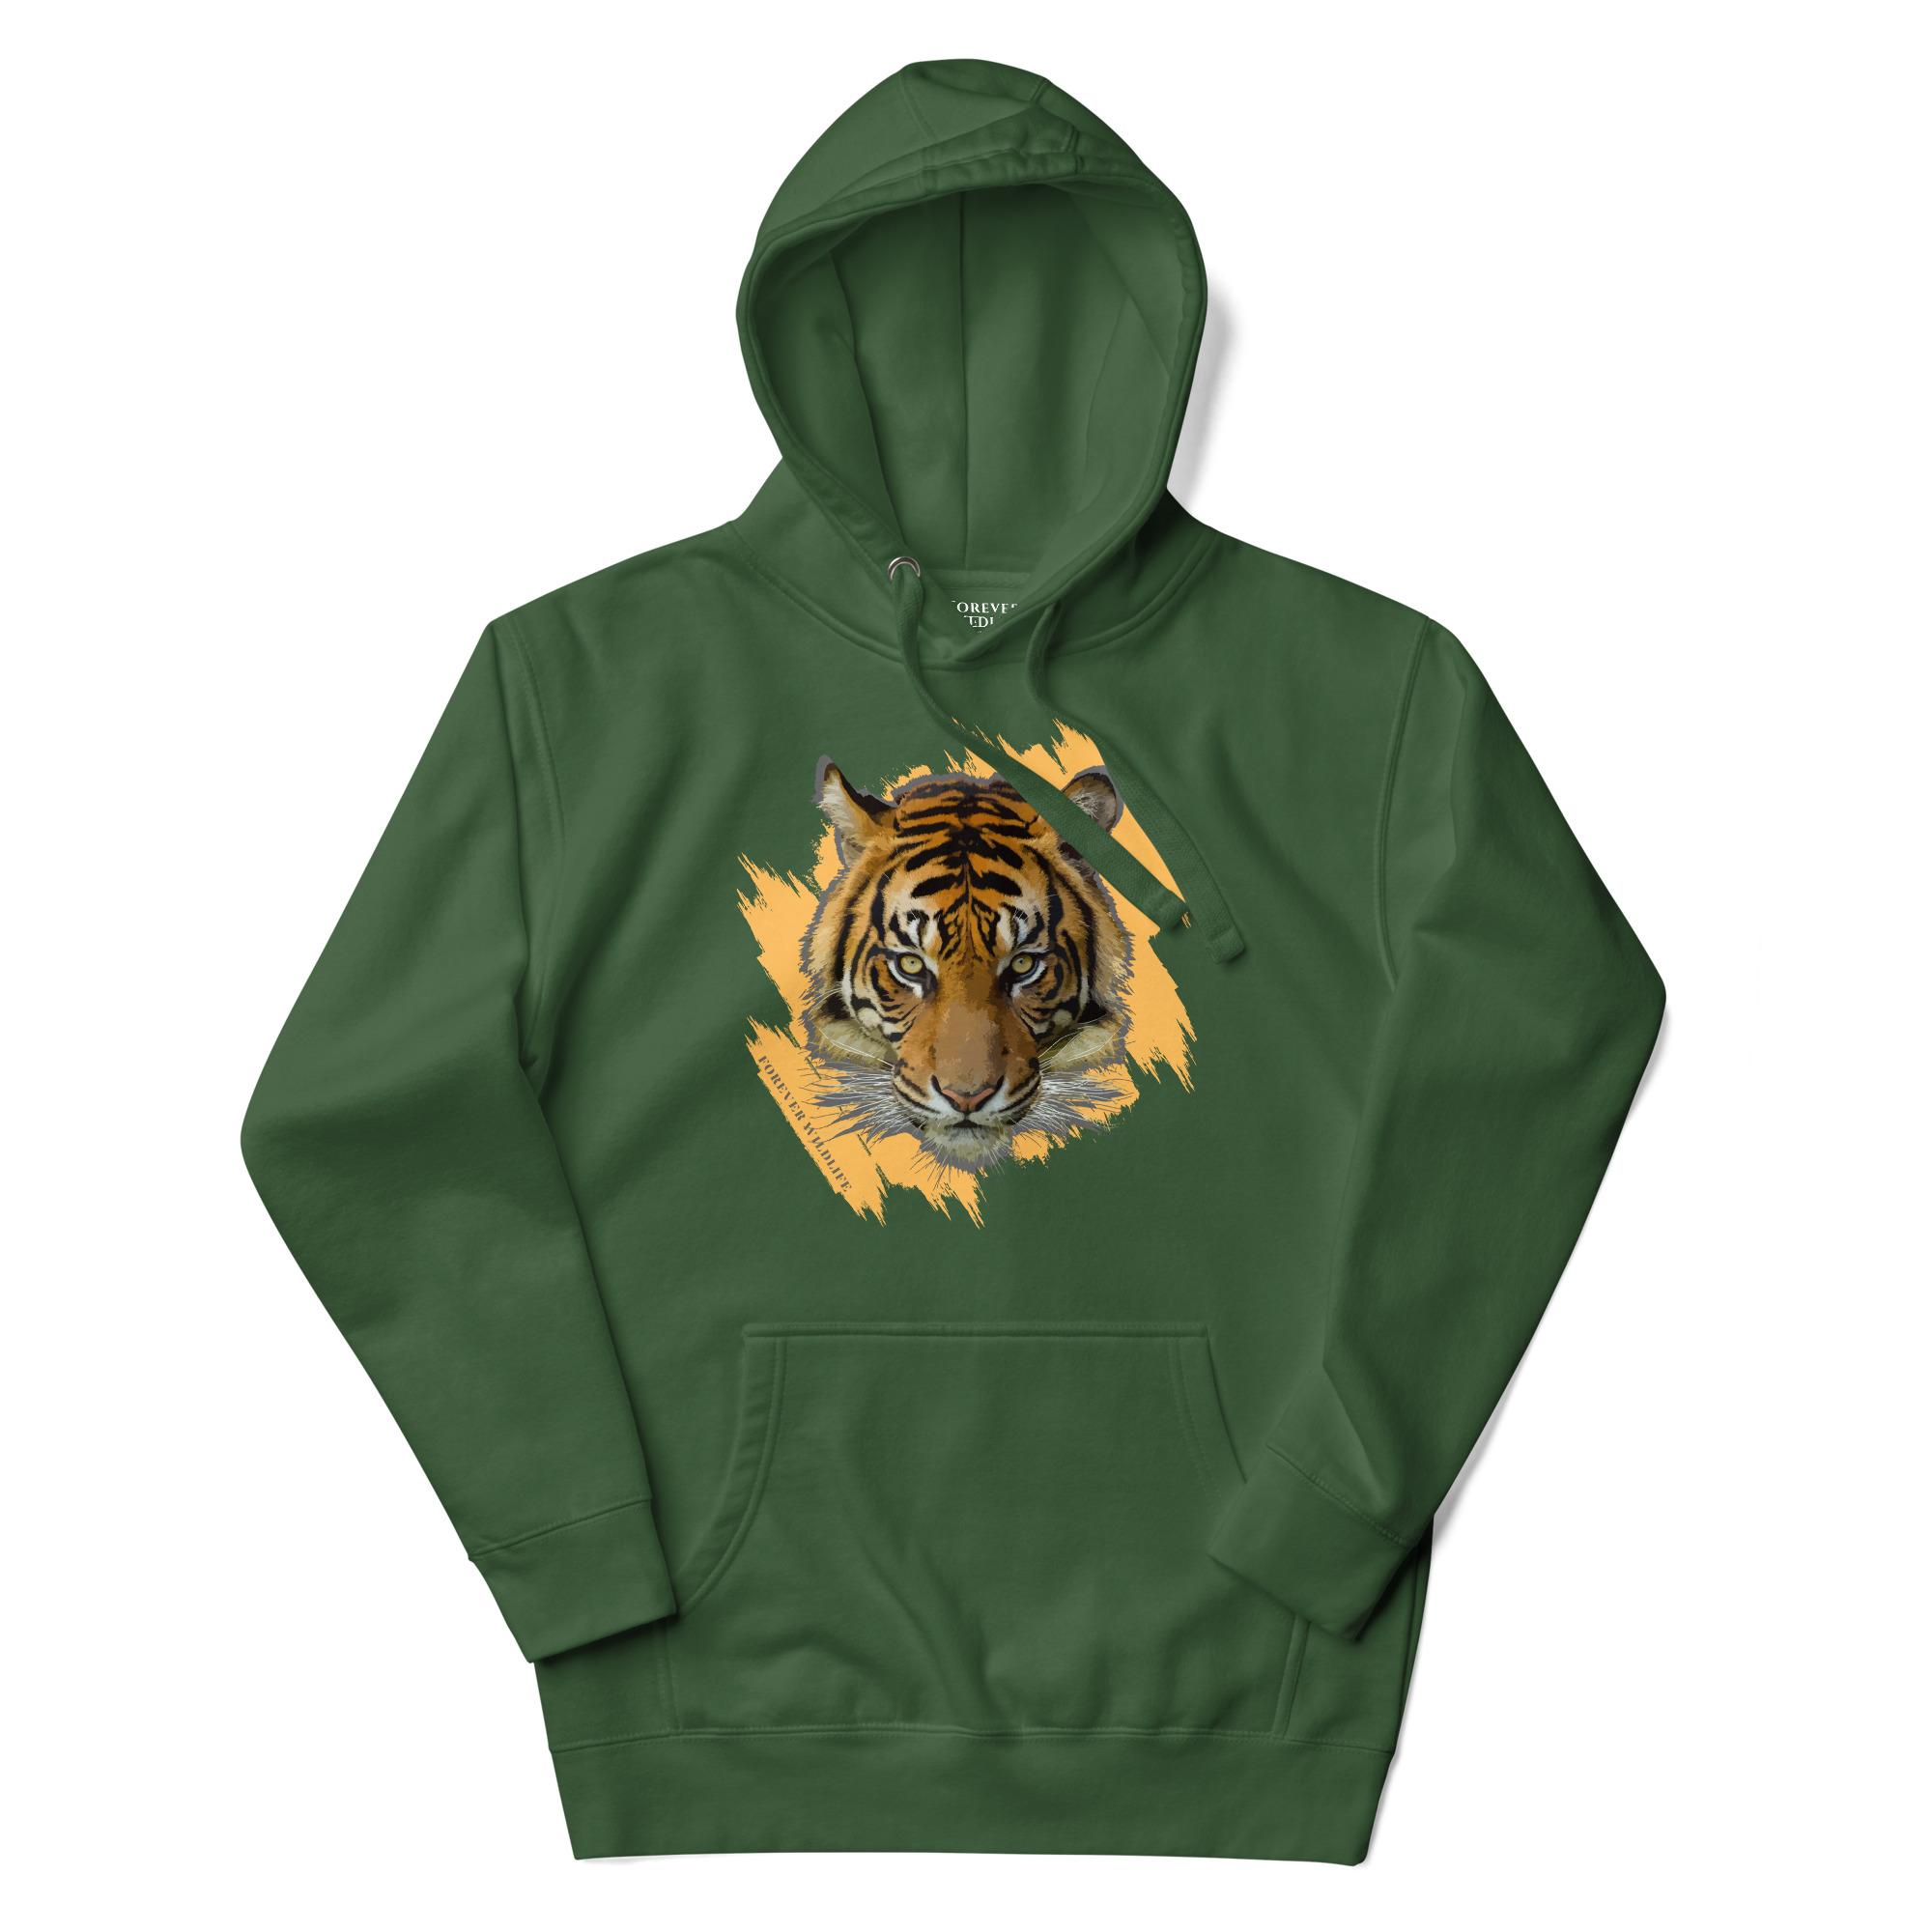 Tiger Face Hoodie in Forest Green – Premium Wildlife Animal Inspirational Hoodie Design, part of Wildlife Hoodies & Clothing from Forever Wildlife